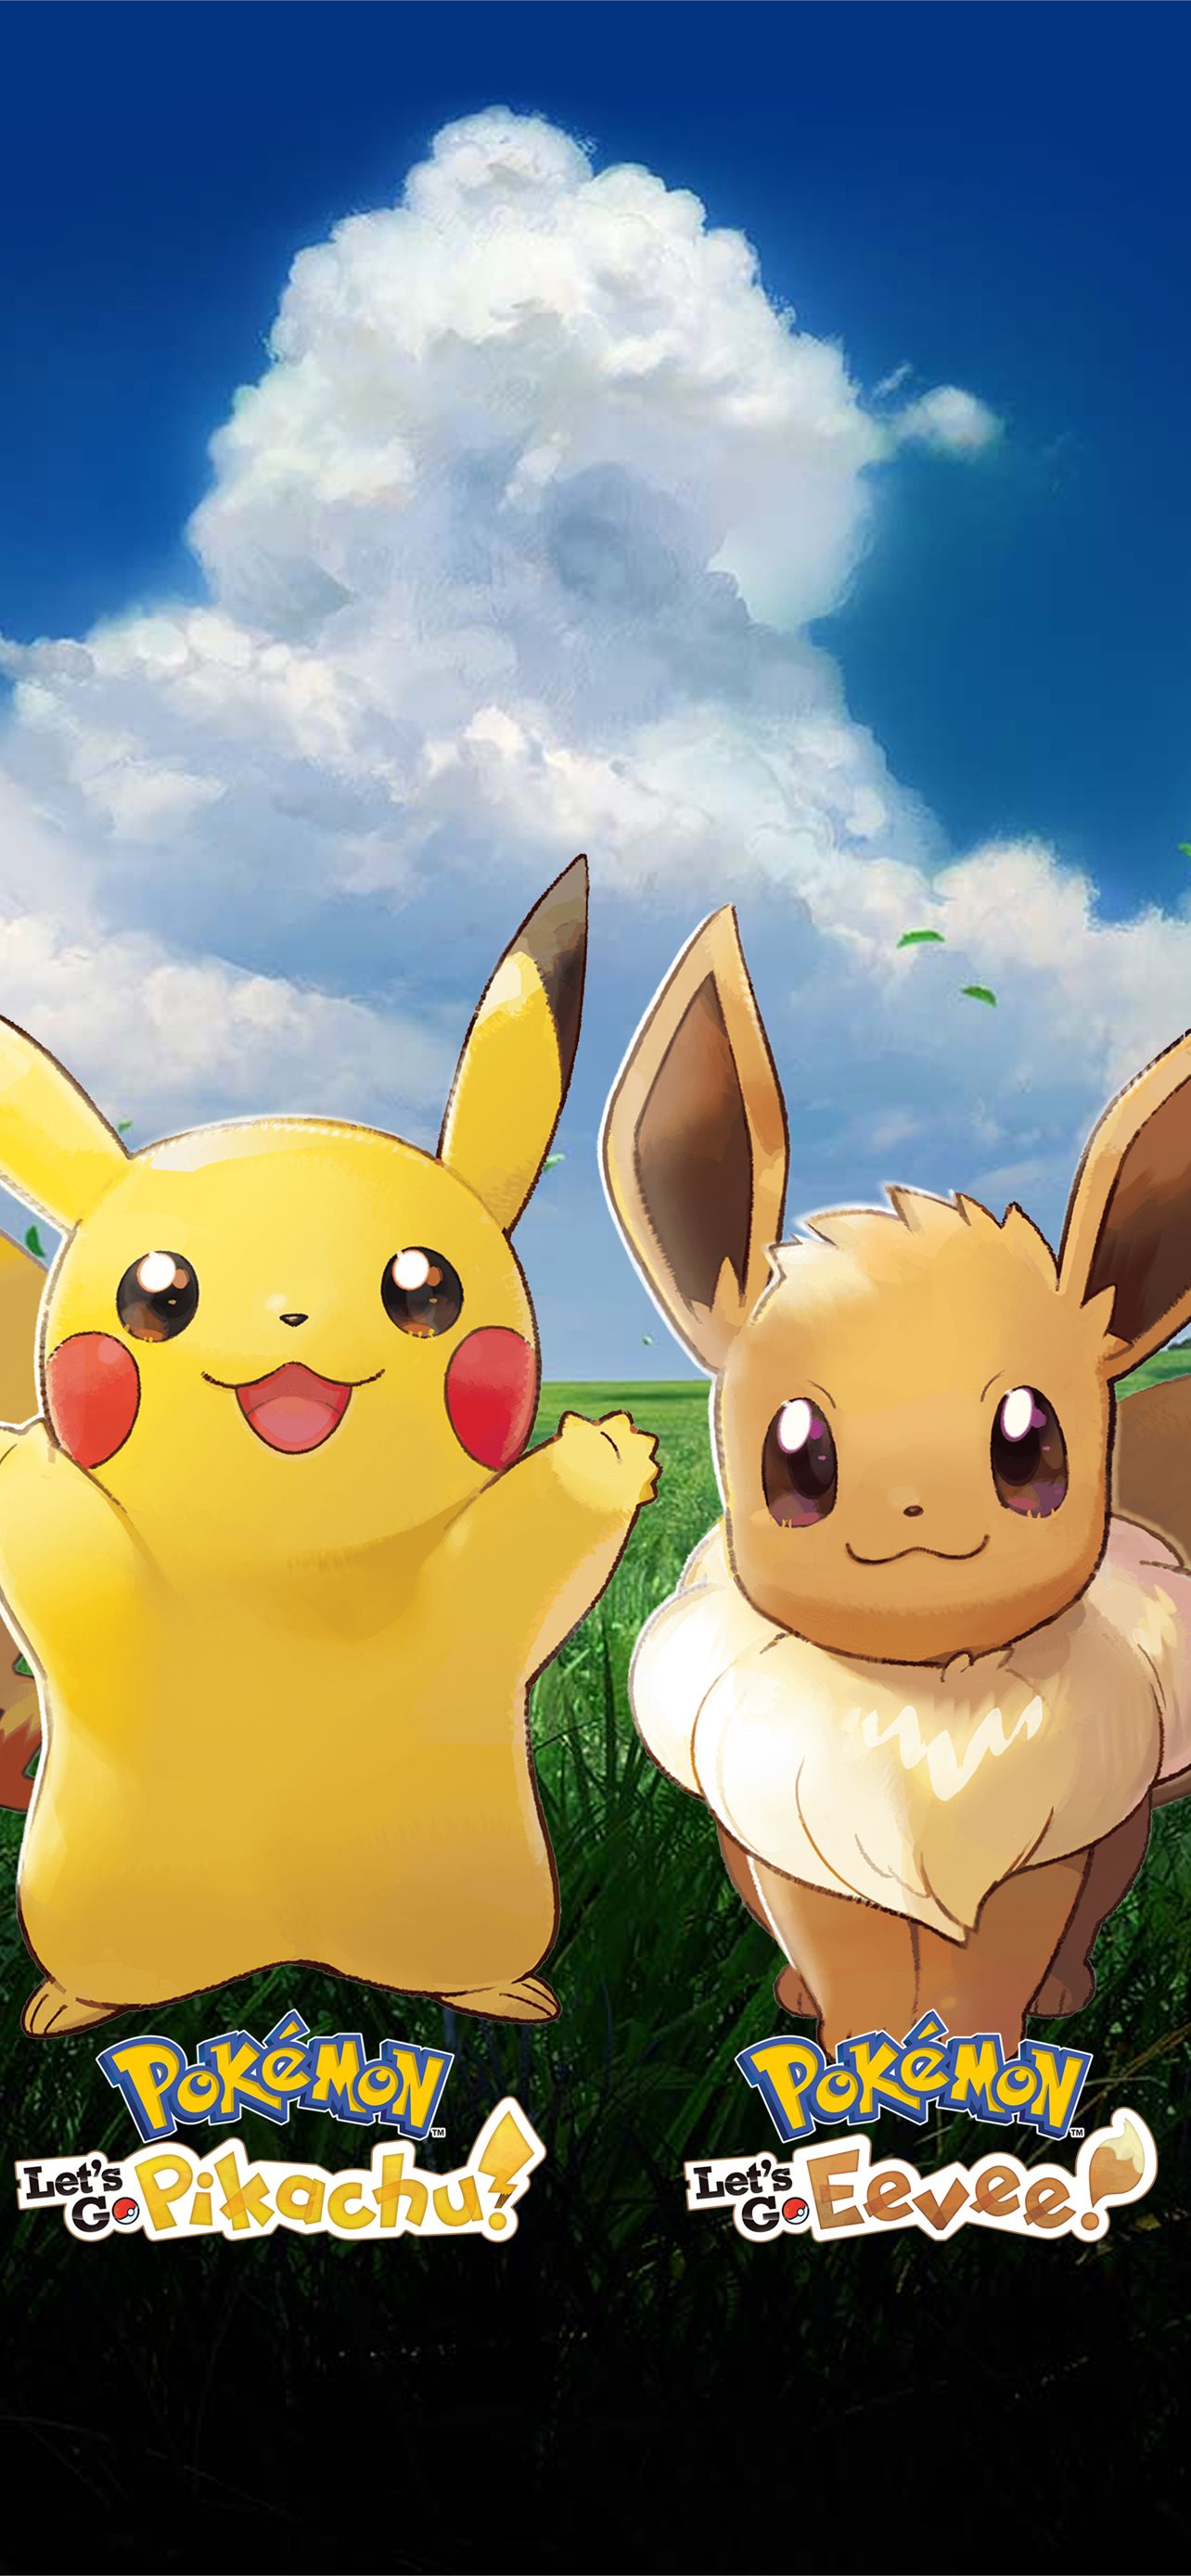 Pokémon Lets Go Pikachu and Lets Go Eevee Phone Wallpaper by DJDavid   Mobile Abyss